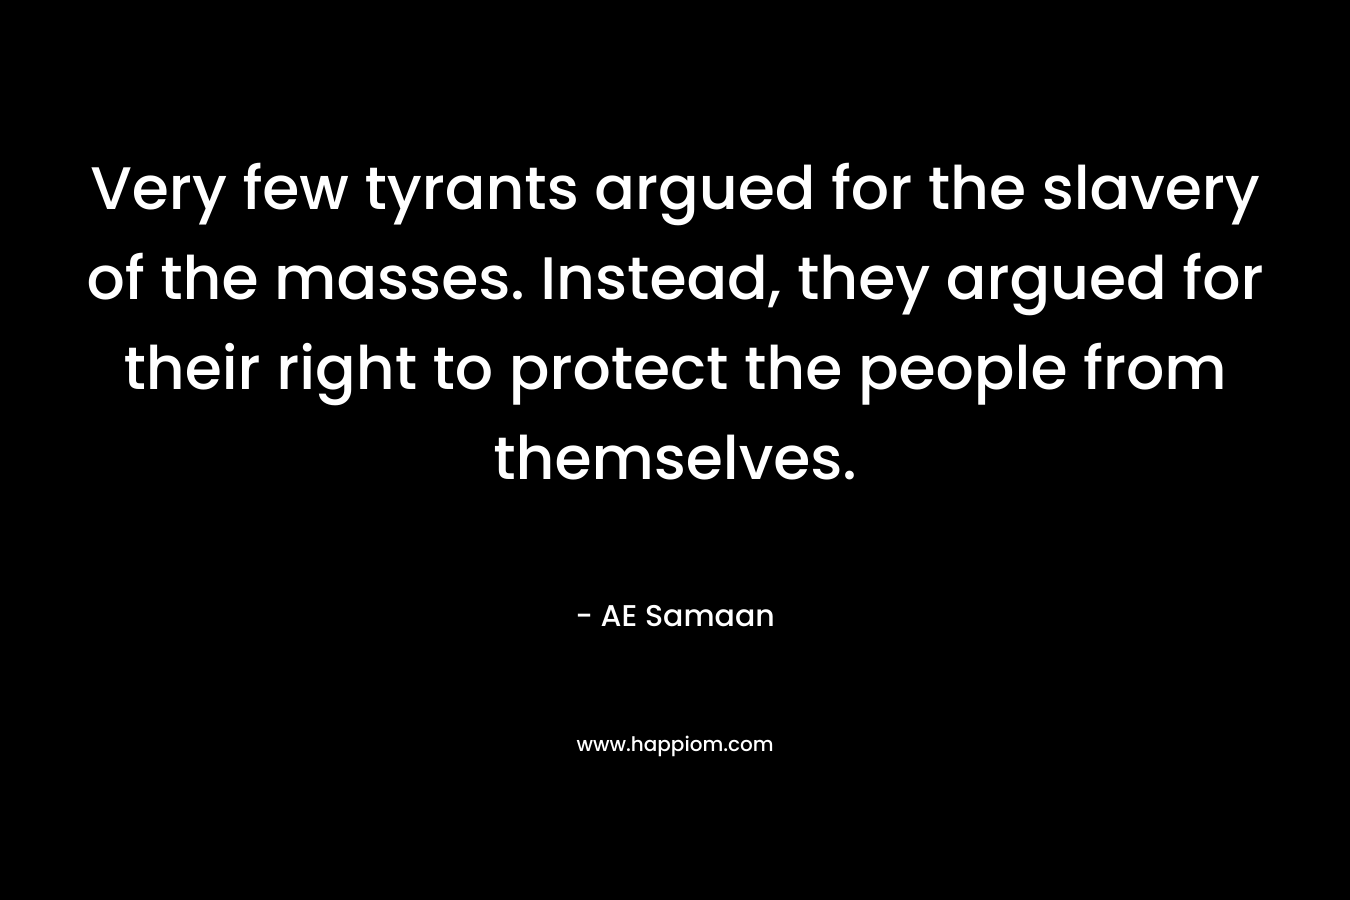 Very few tyrants argued for the slavery of the masses. Instead, they argued for their right to protect the people from themselves.